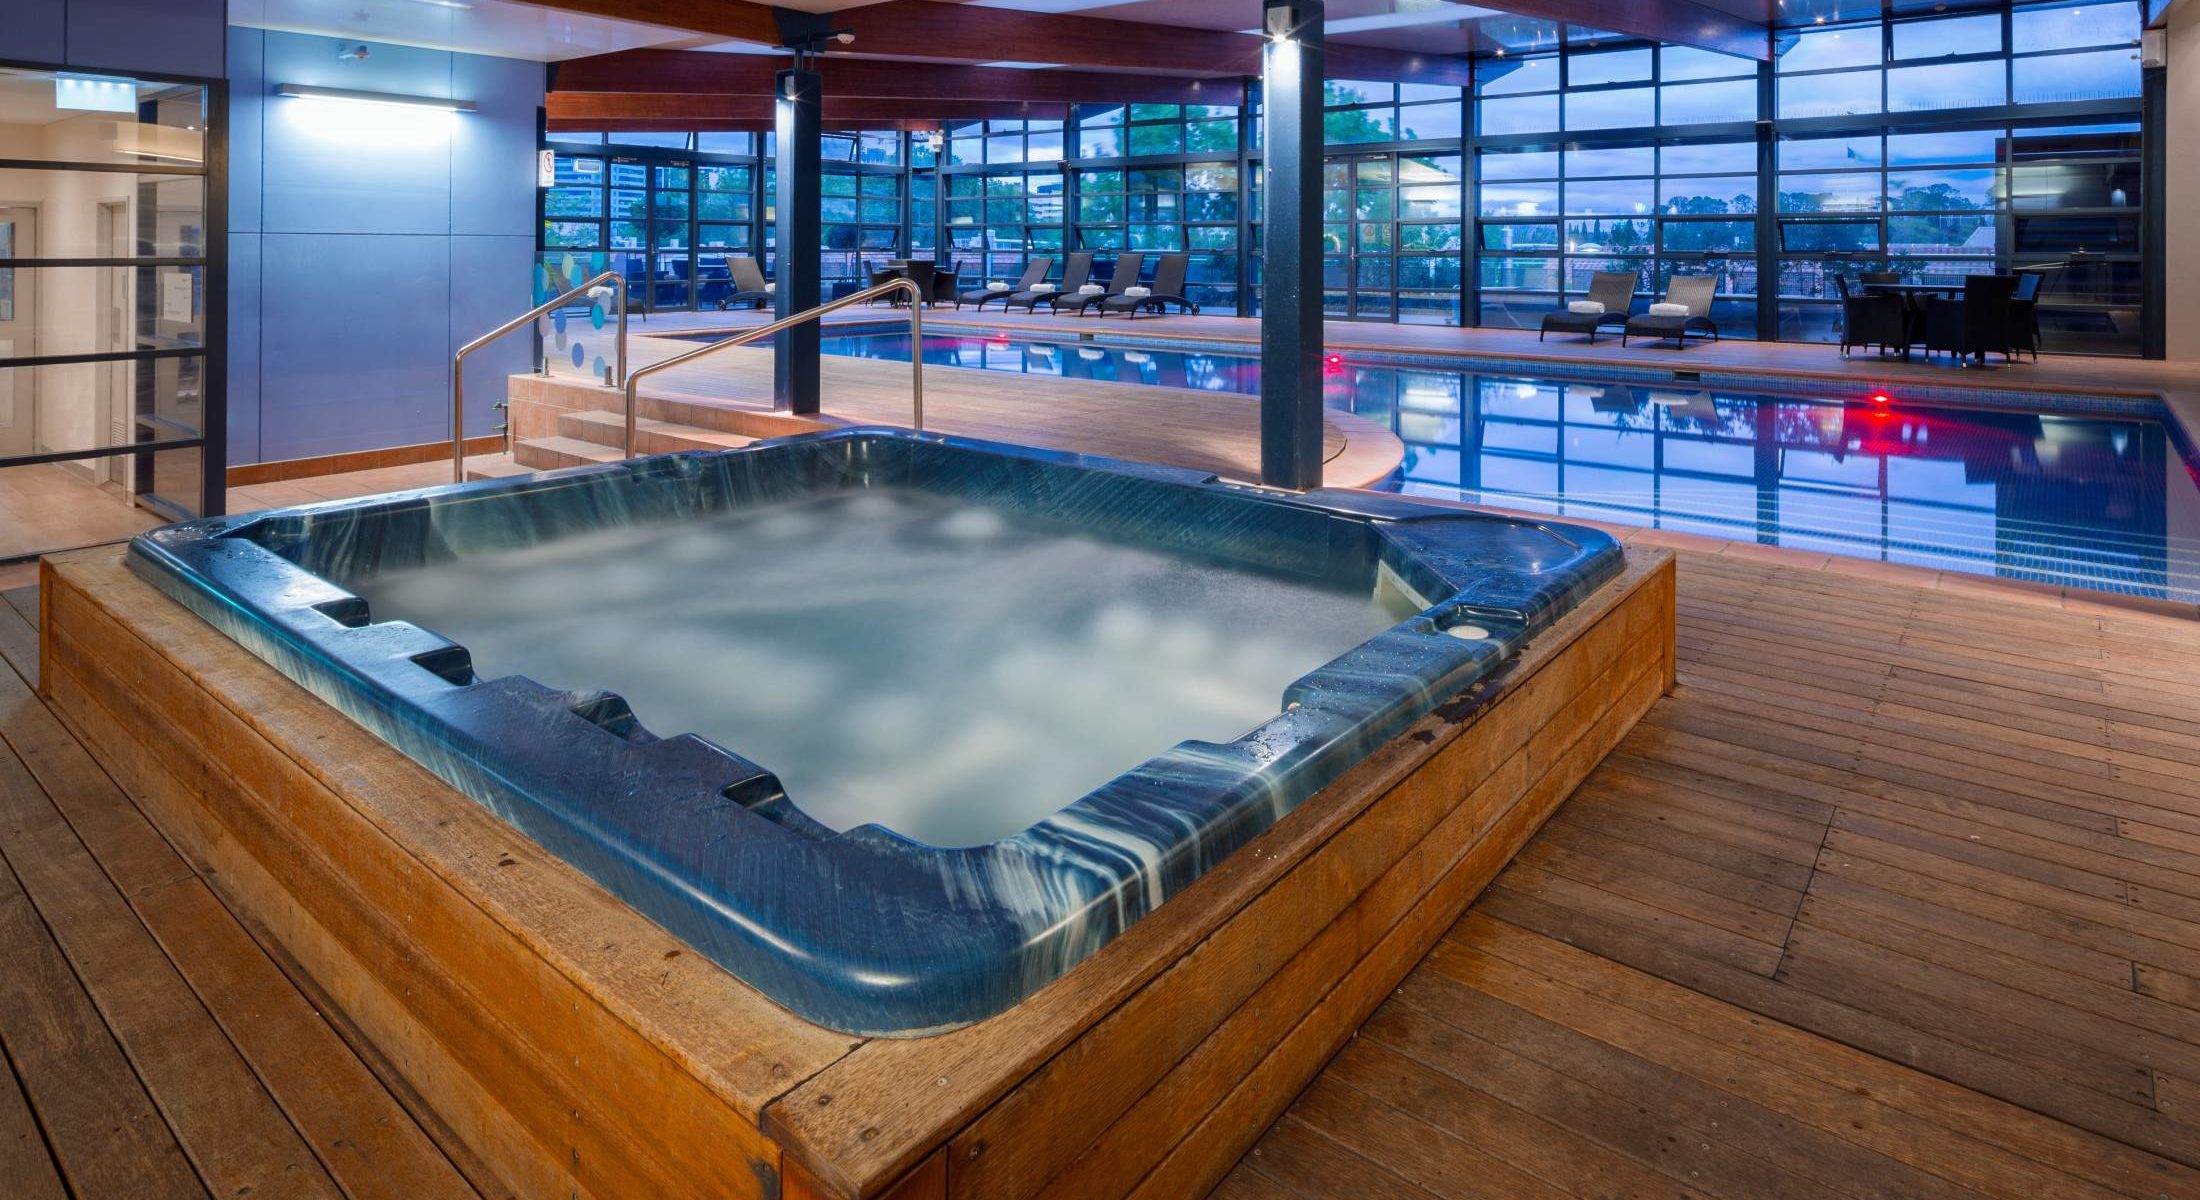 Families and couples will enjoy the indoor spa and heated pool